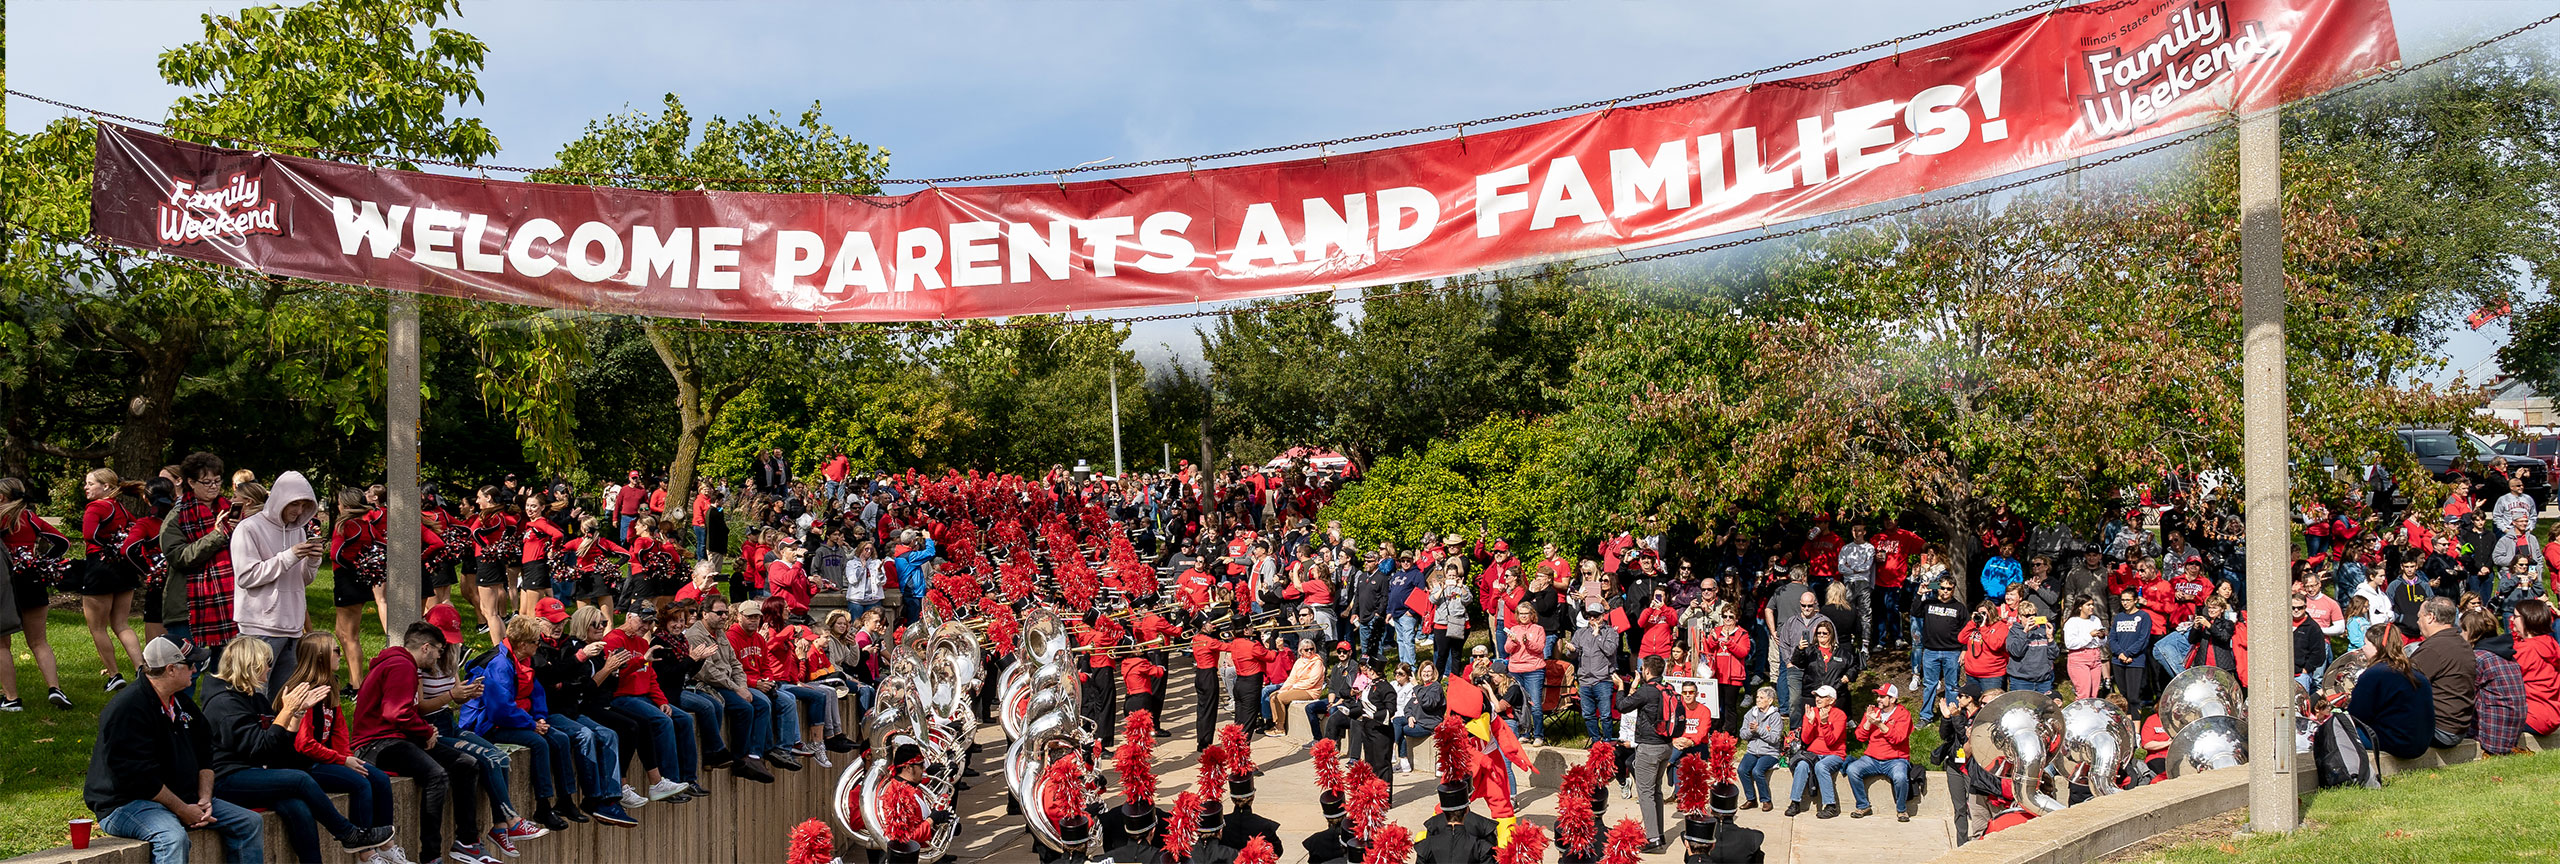 Students and family under the Family Weekend event banner .